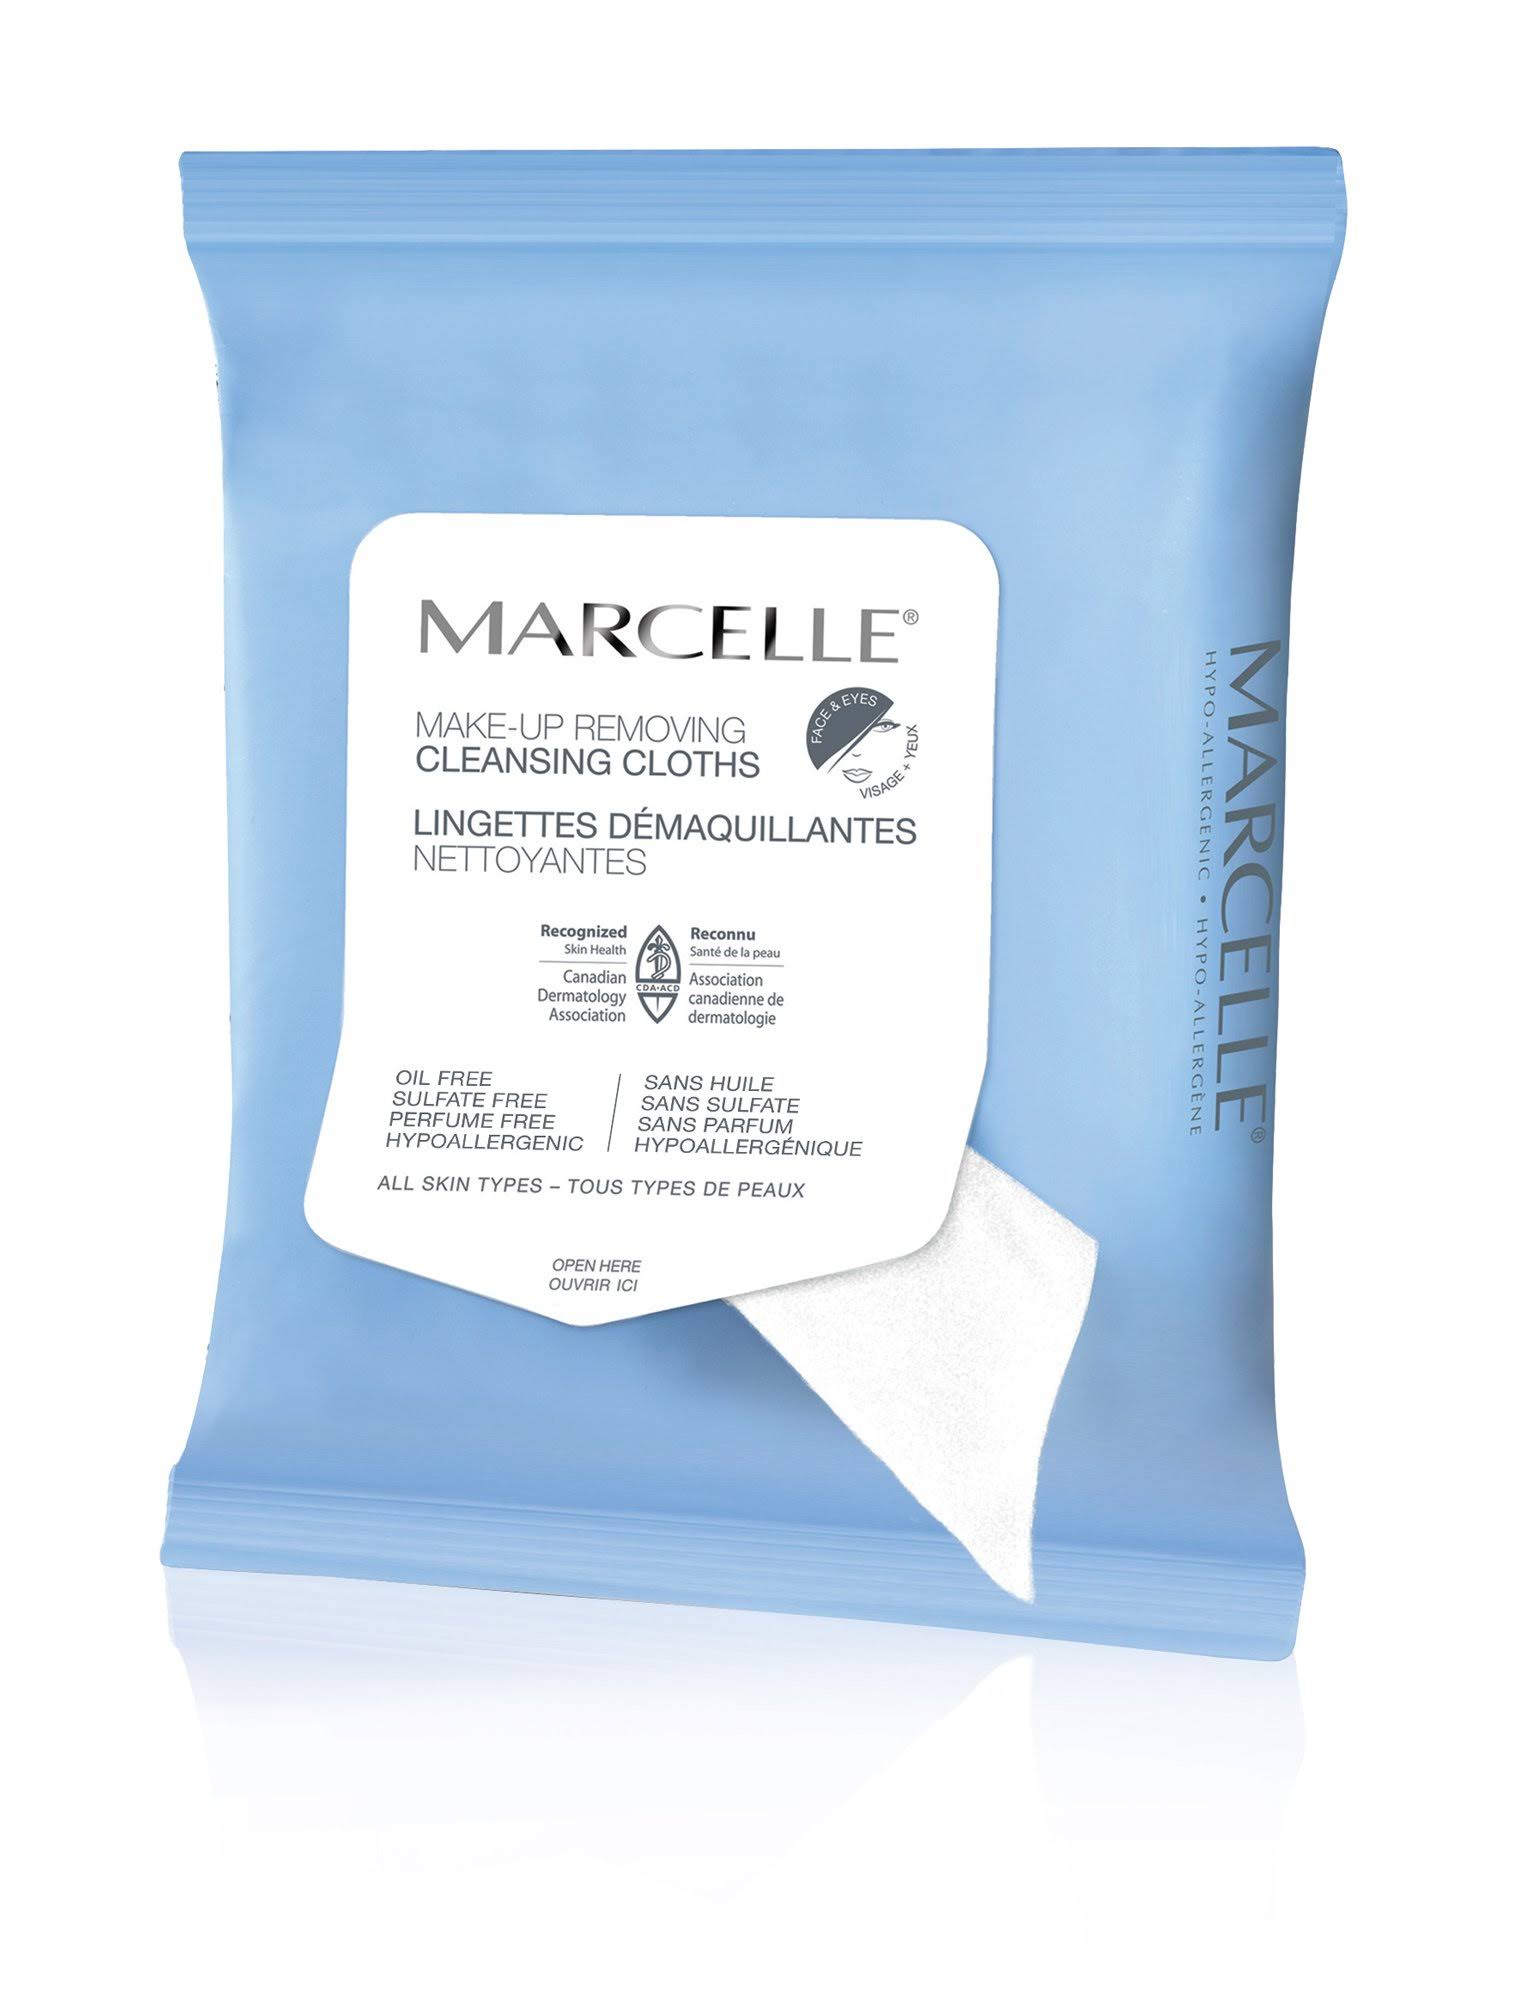 Marcelle Makeup-Removing Cleansing Cloths